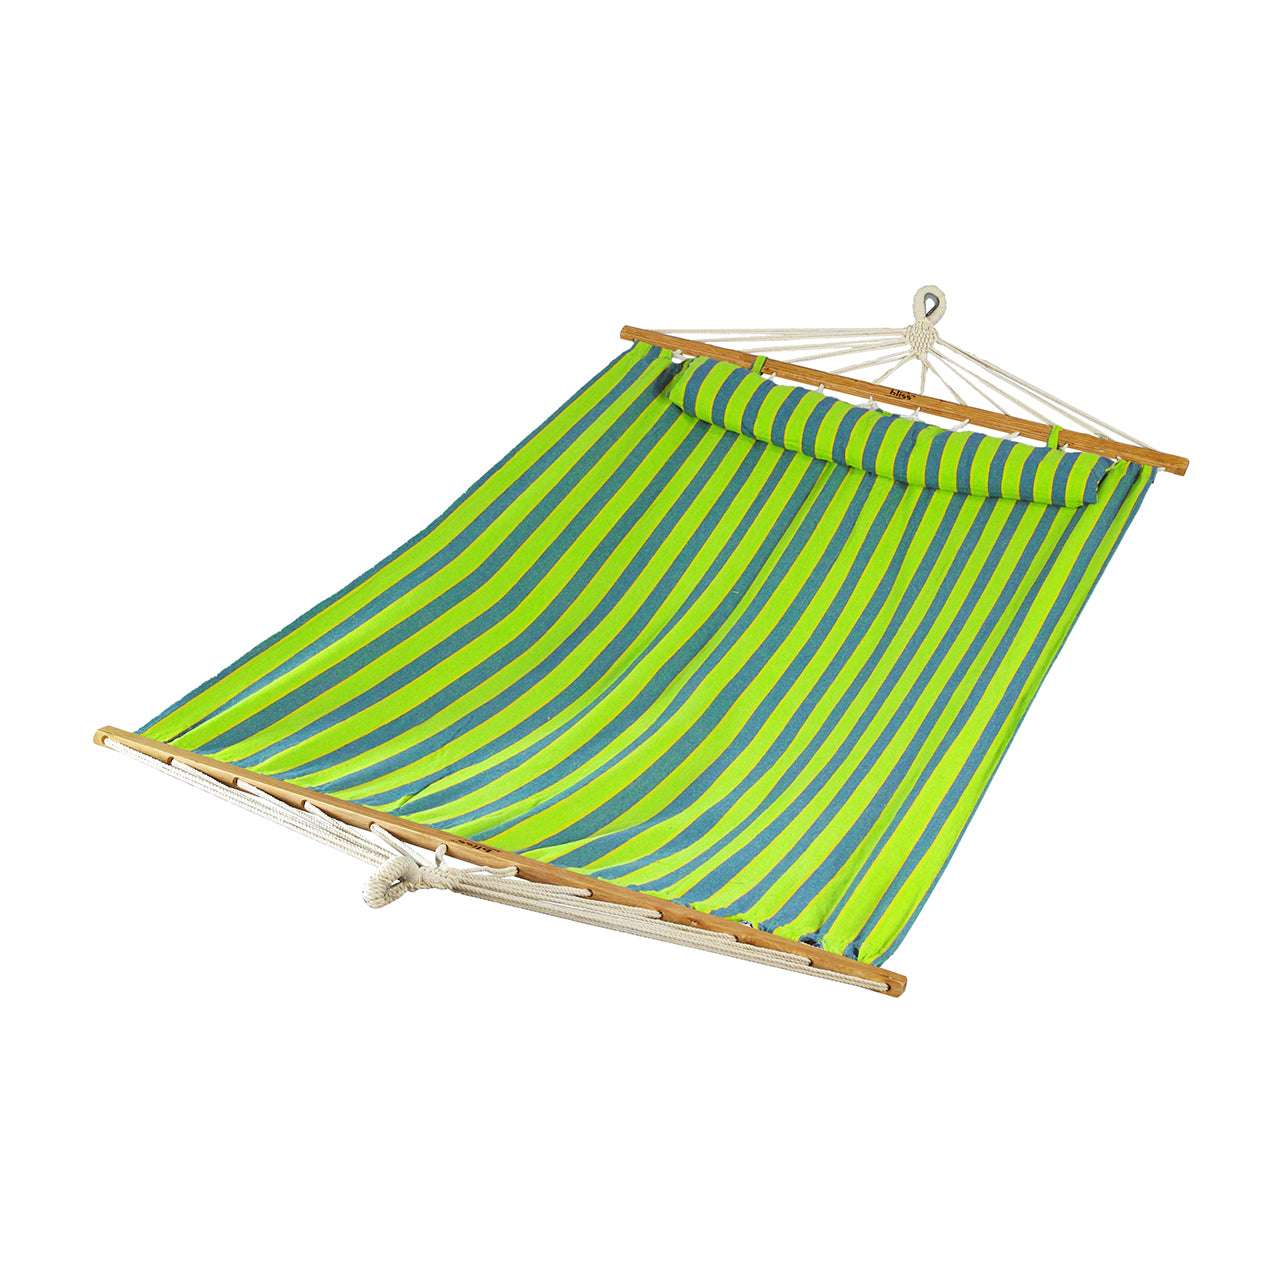 Bliss Hammocks 48-inch Wide Caribbean Hammock with Pillow, Velcro Straps, and Chains in the Mediterranean stripe variation.